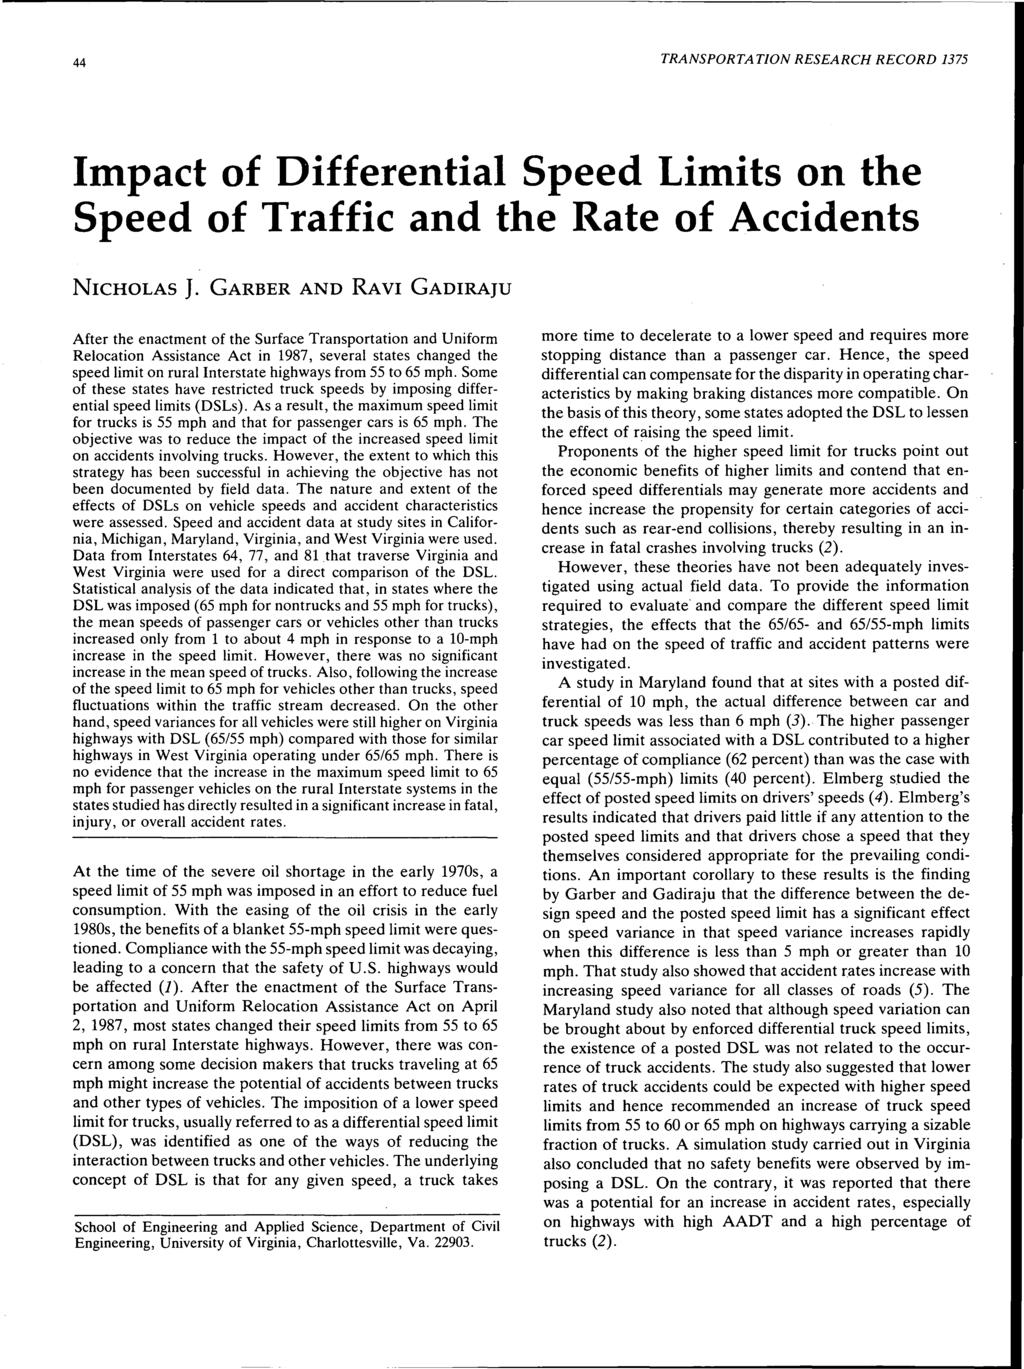 44 TRANSPORTATION RESEARCH RECORD 1375 Impact of Differential Speed Limits on the Speed of Traffic and the Rate of Accidents NICHOLAS J.